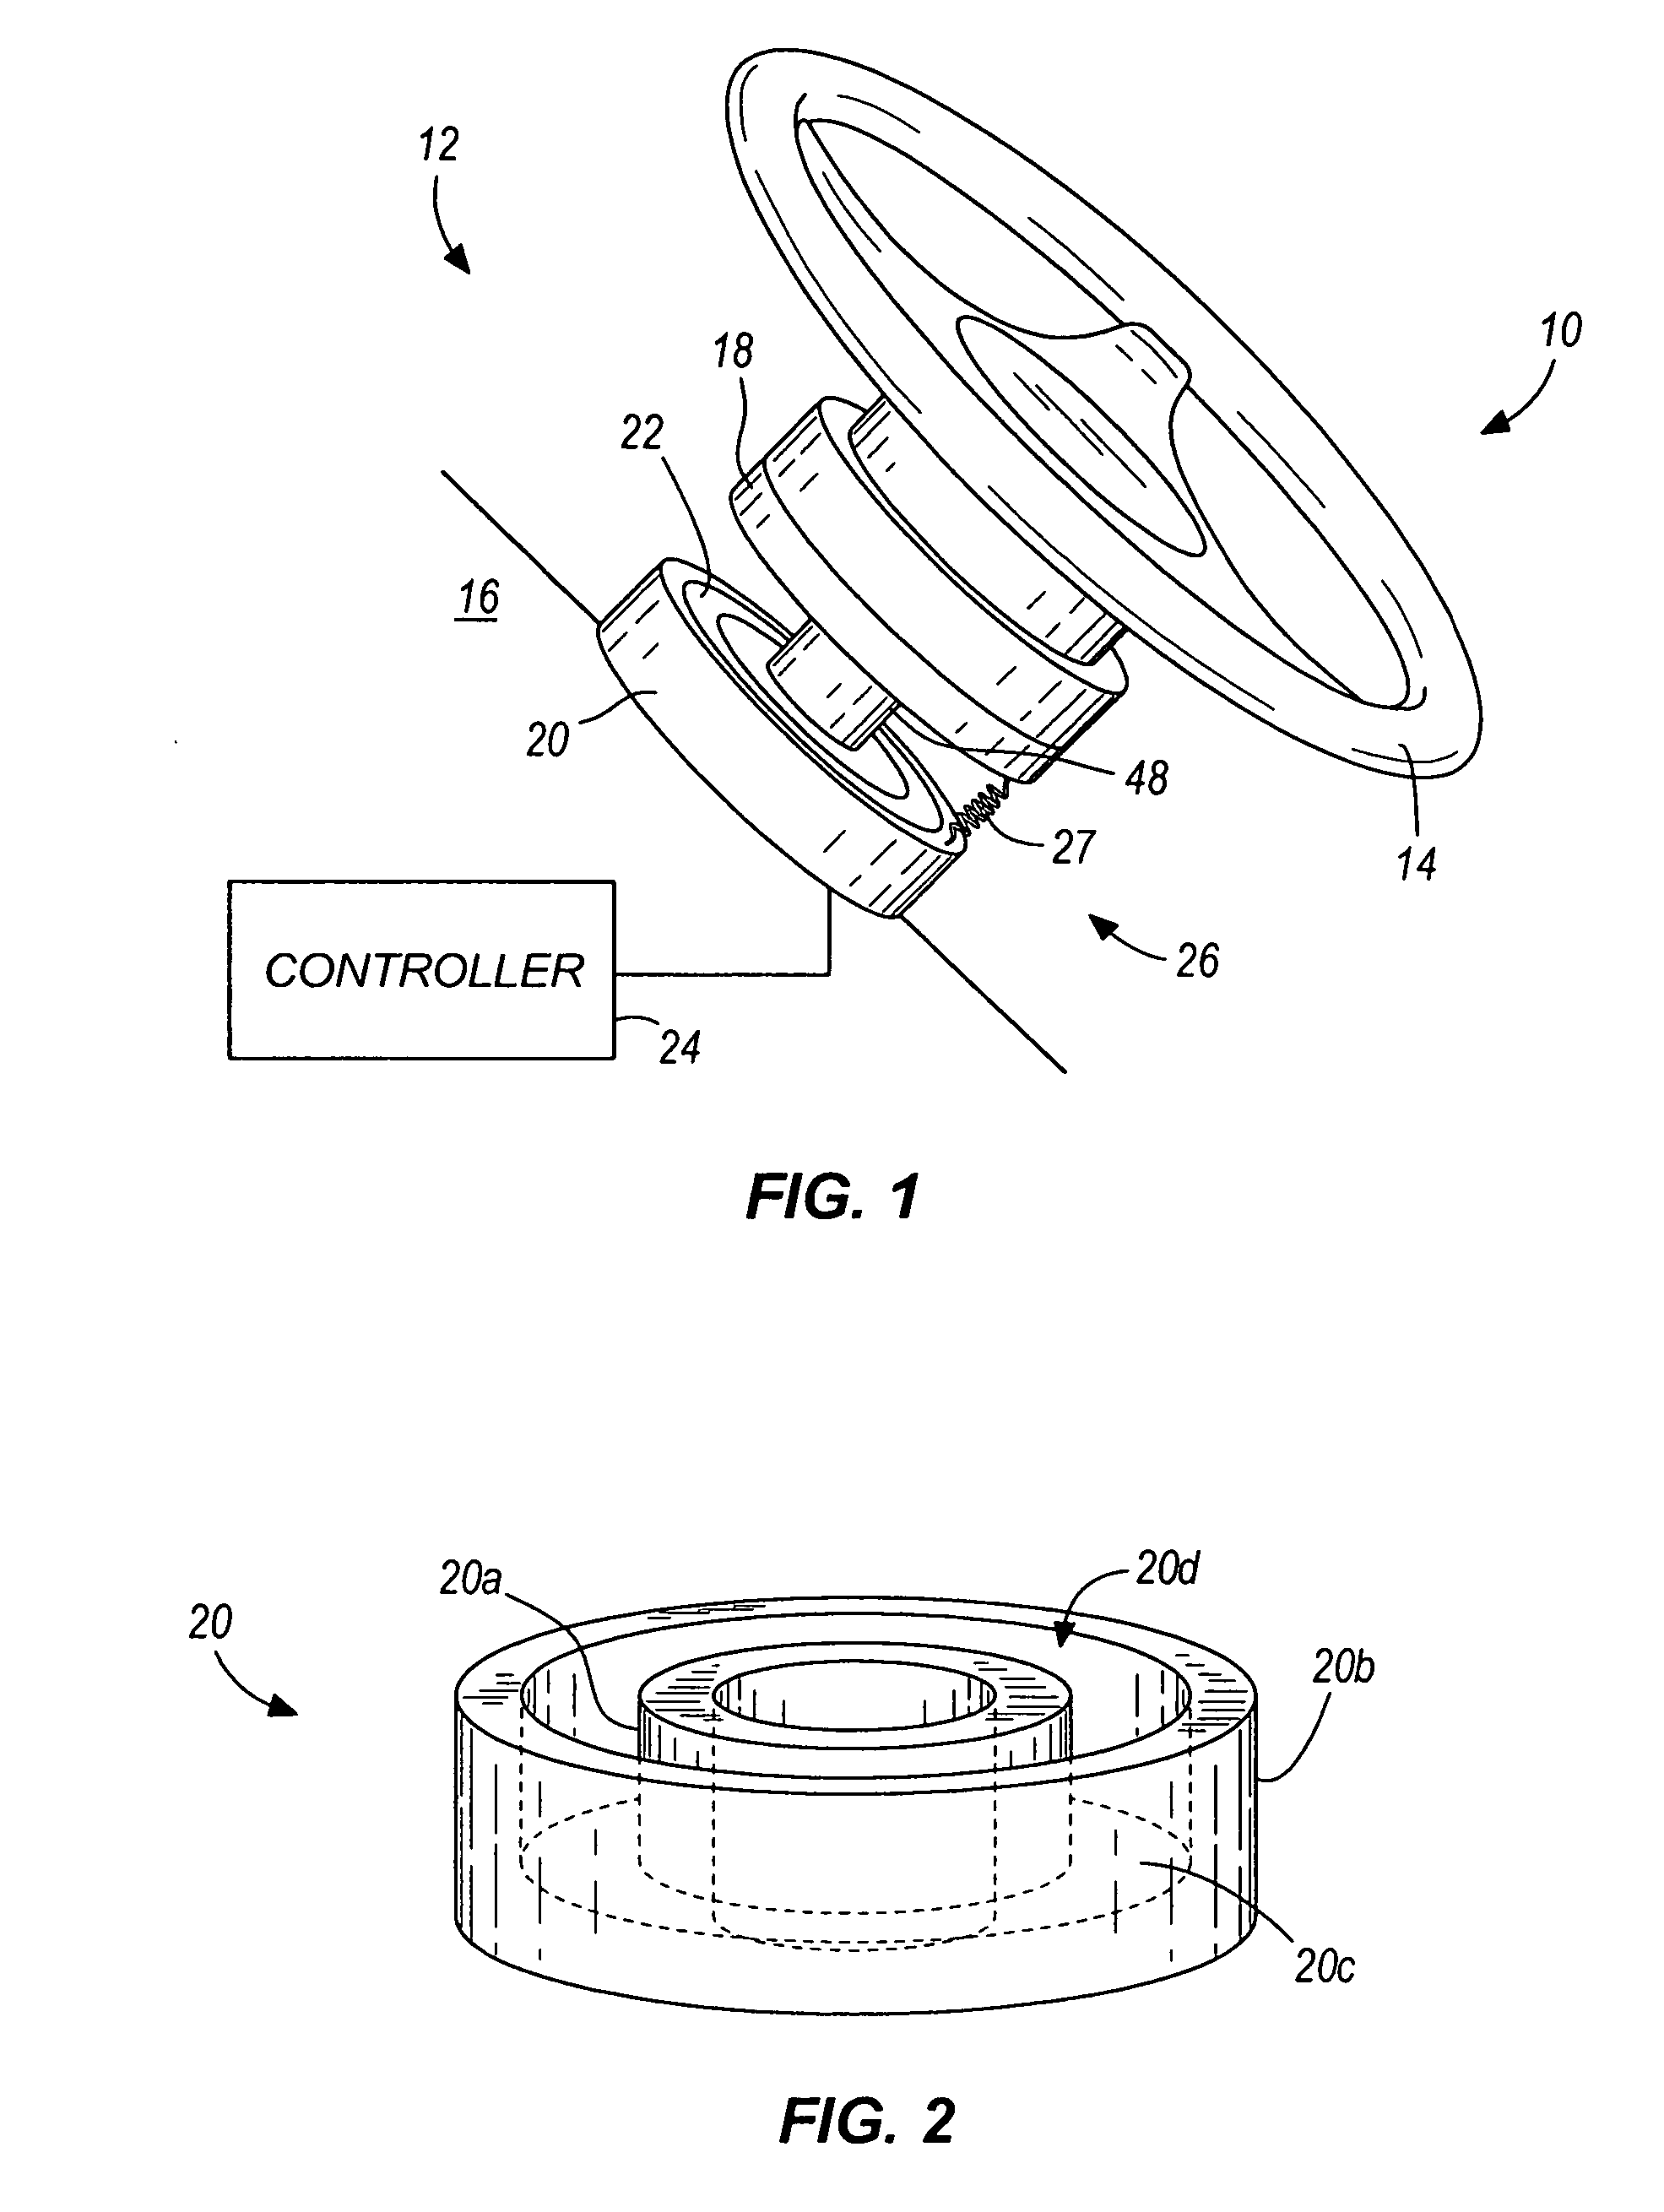 Residual magnetic devices and methods